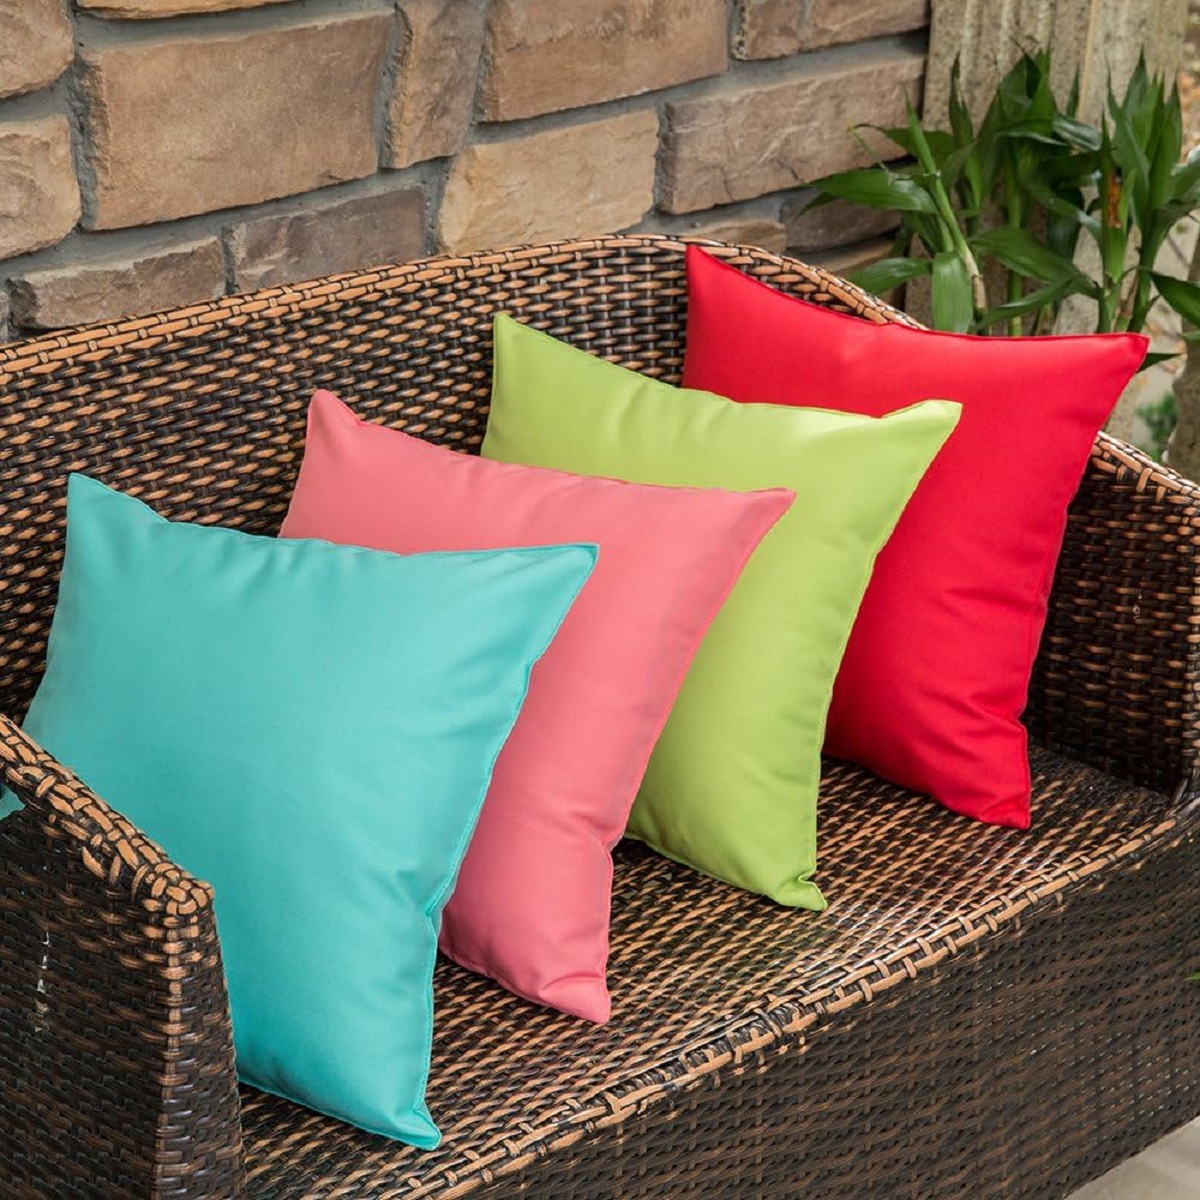 How To Make Cushions For Outdoor Furniture